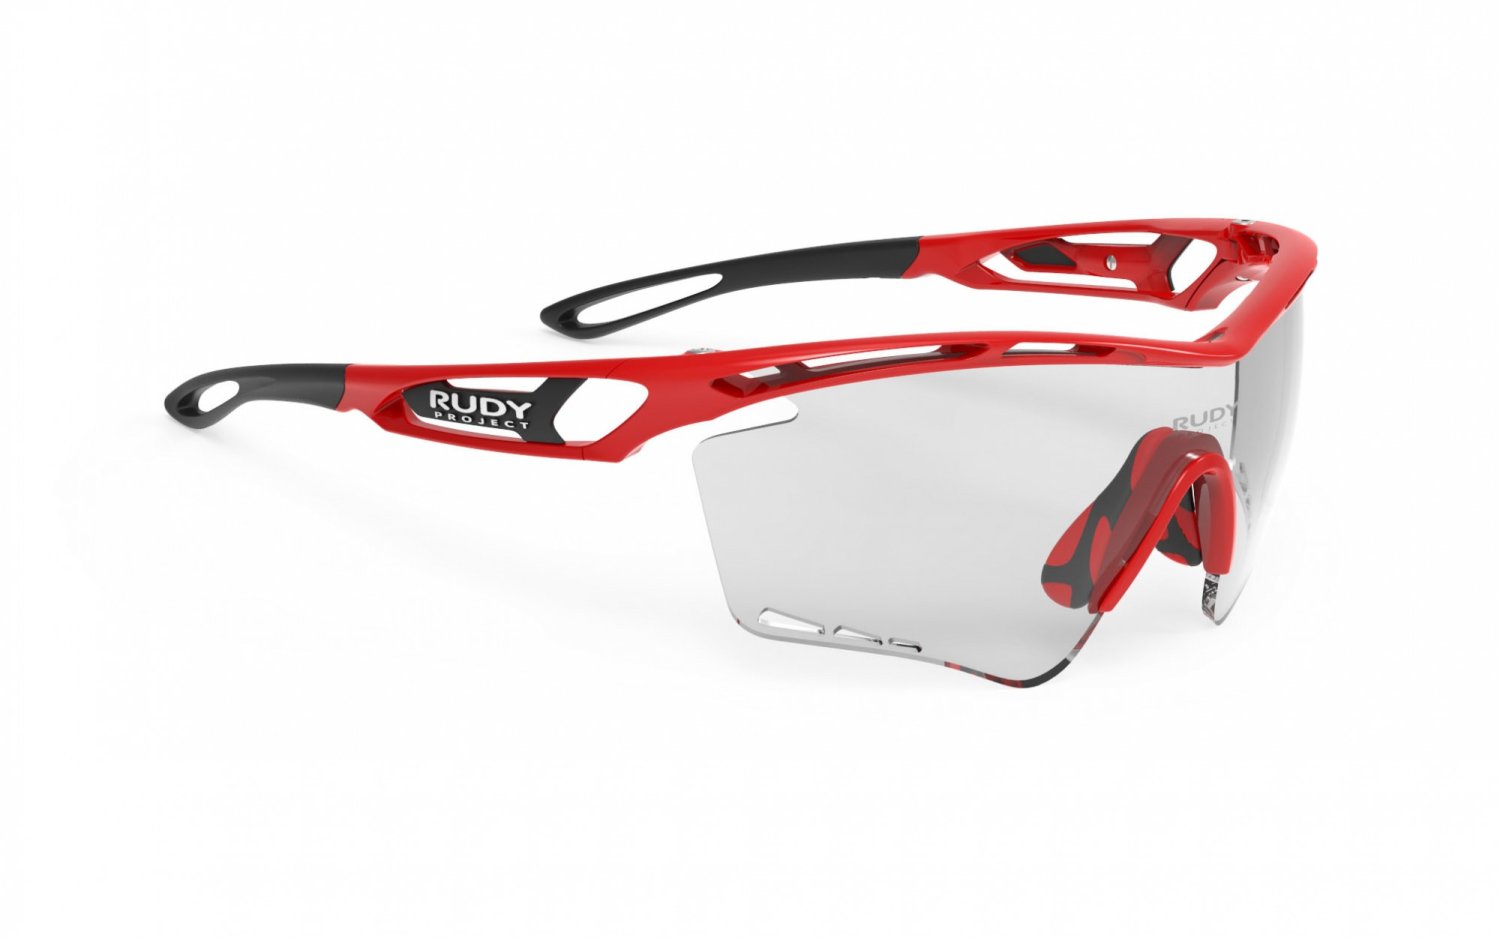 Очки велосипедные Rudy Project TRALYX XL FIRE RED Gloss - IMPACTX PHOTOCHROMIC 2Black, SP397345Z0000 очки велосипедные rudy project tralyx impactx photochromic 2black fire red gloss sp397345 0000